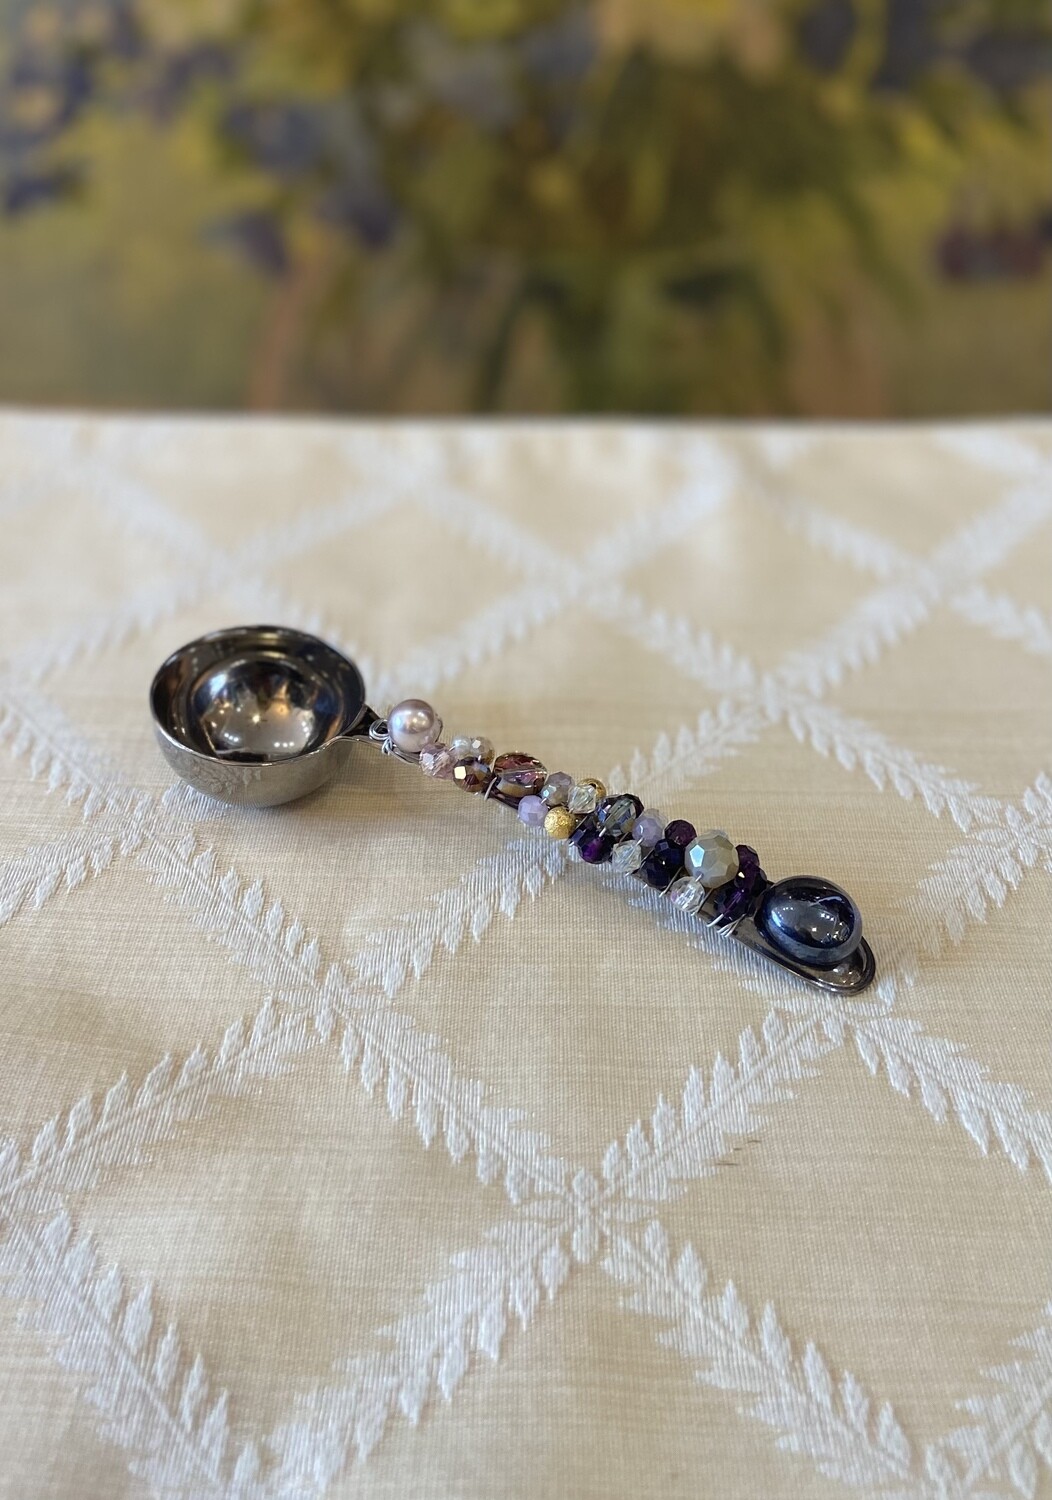 Small Round Embellished Spoon purples